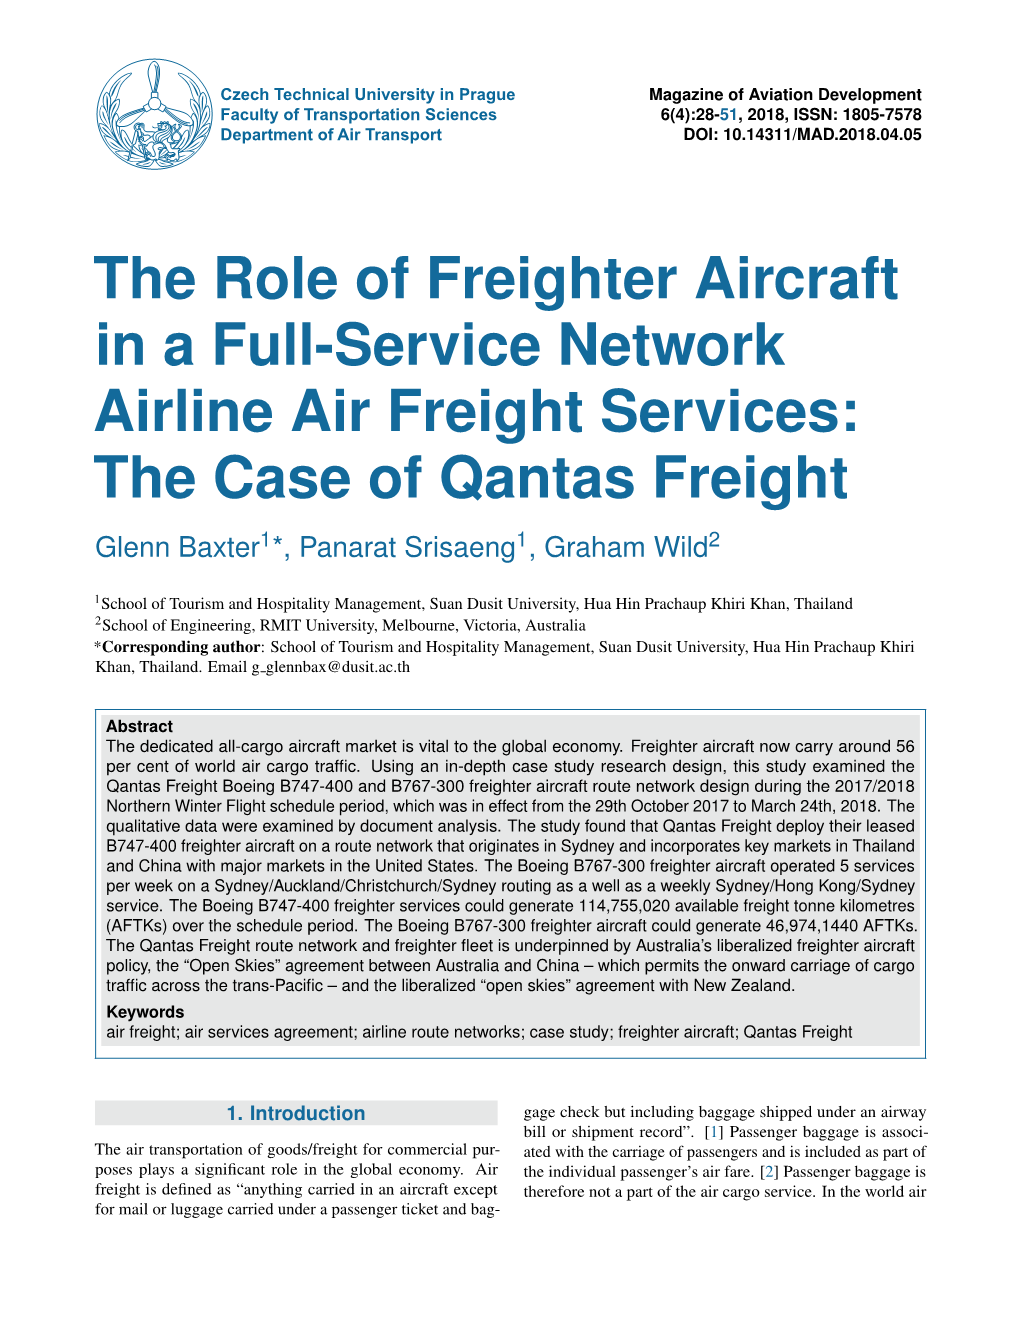 The Role of Freighter Aircraft in a Full-Service Network Airline Air Freight Services: the Case of Qantas Freight Glenn Baxter1*, Panarat Srisaeng1, Graham Wild2